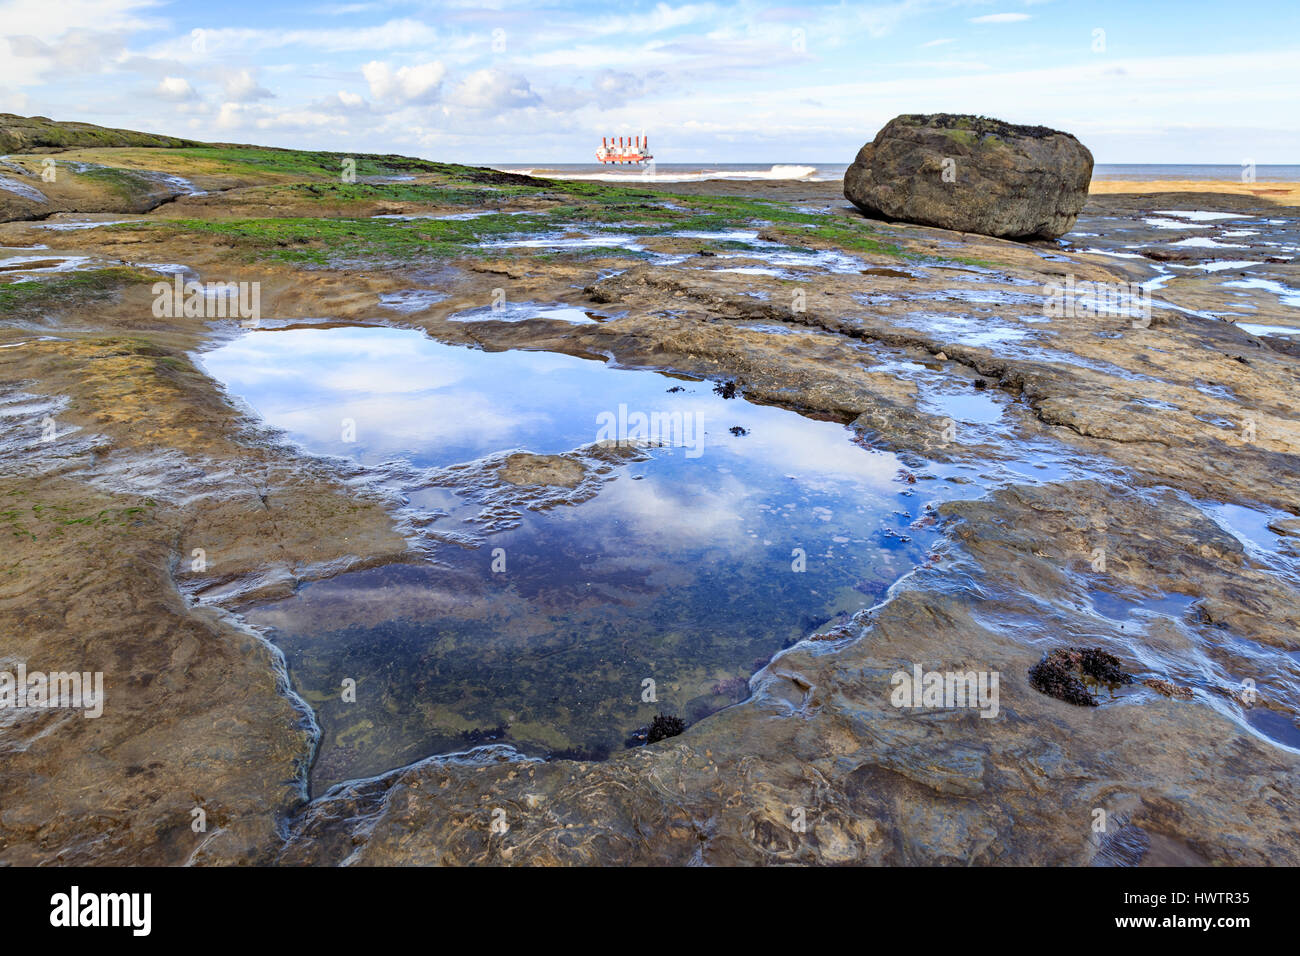 STAITHES, ENGLAND - MARCH 1: HDR image of Staithes beach and rockpools with 'MPI Resolution' offshore. In Staithes, North Yorkshire, England. On 1st M Stock Photo